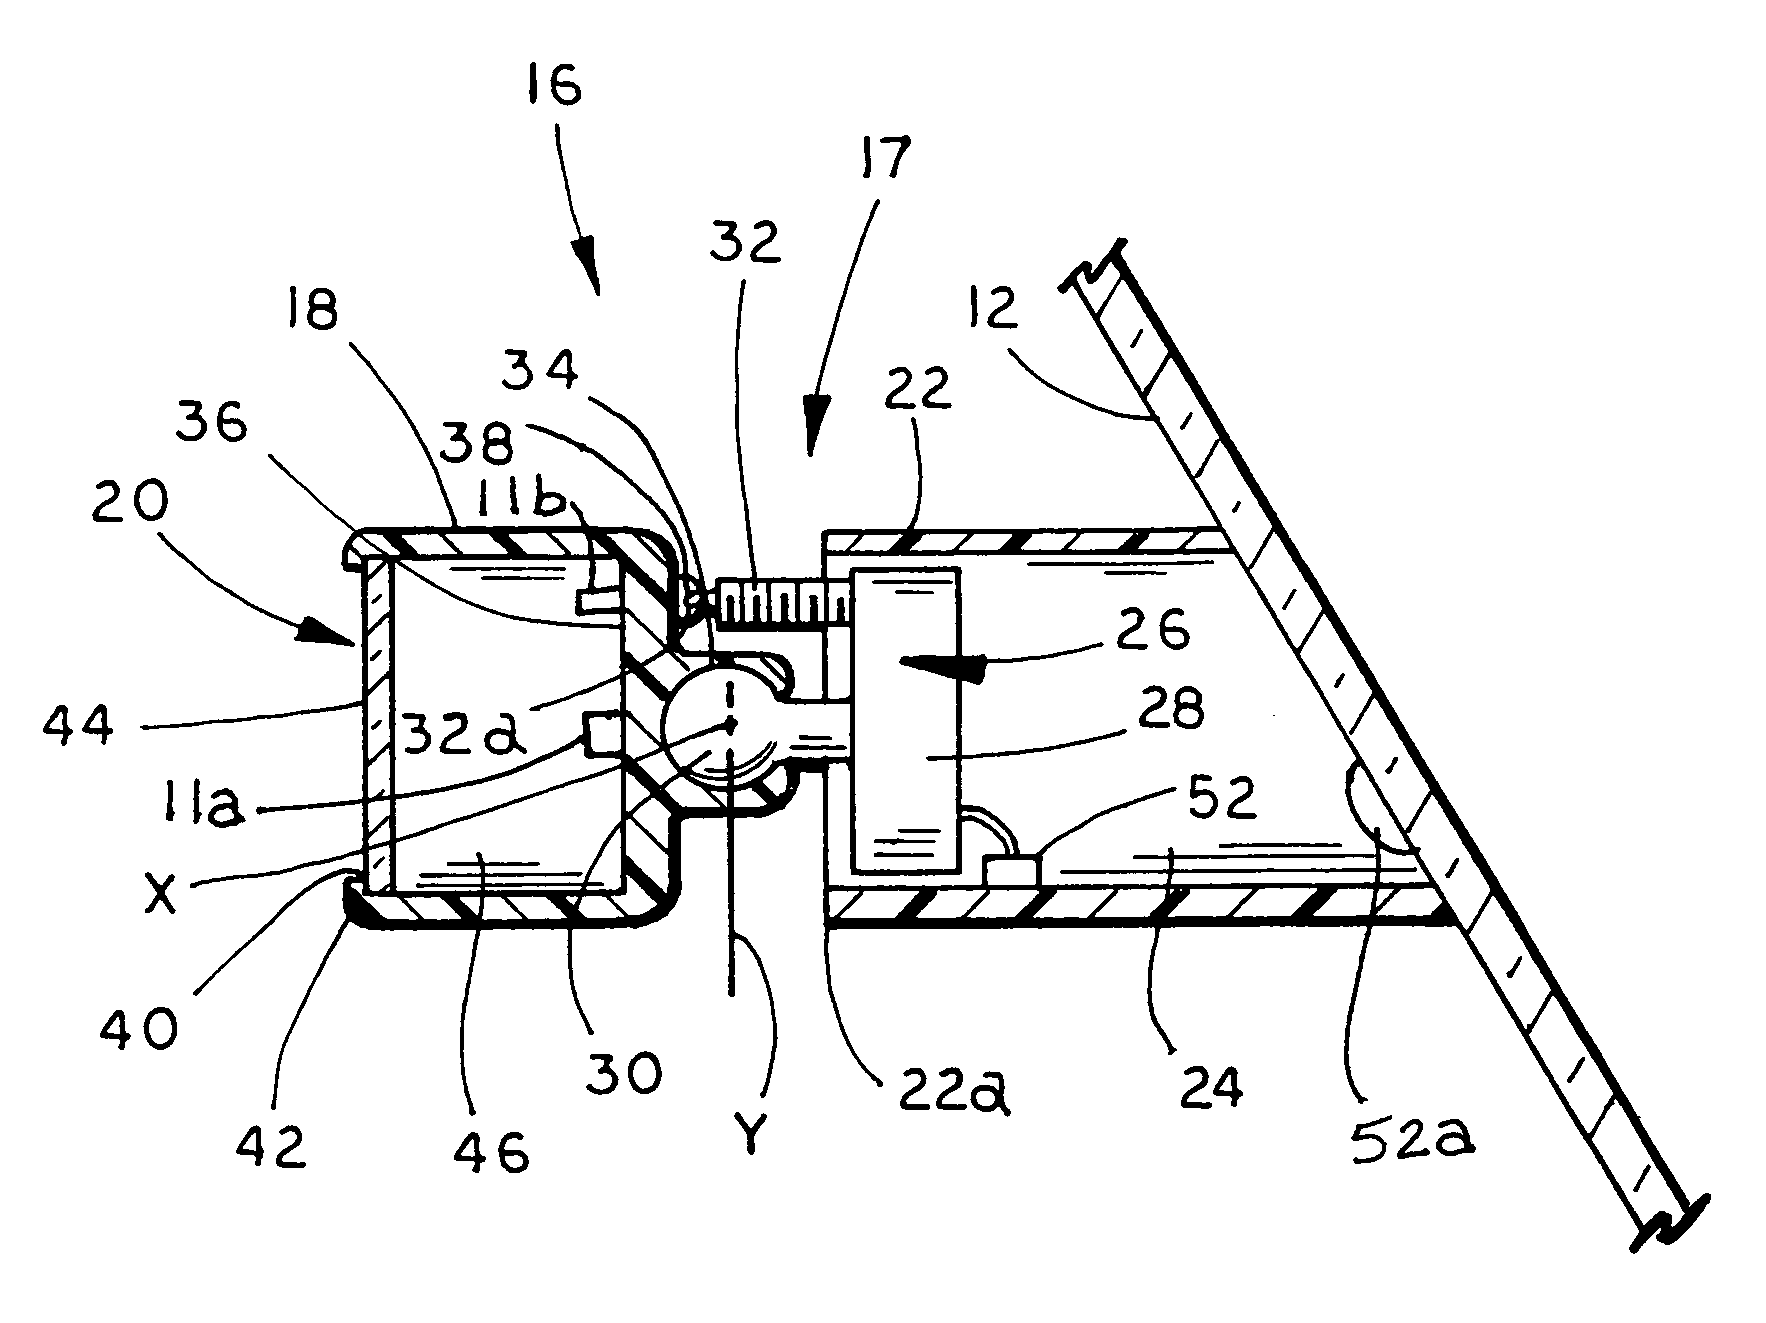 Memory mirror system for vehicle